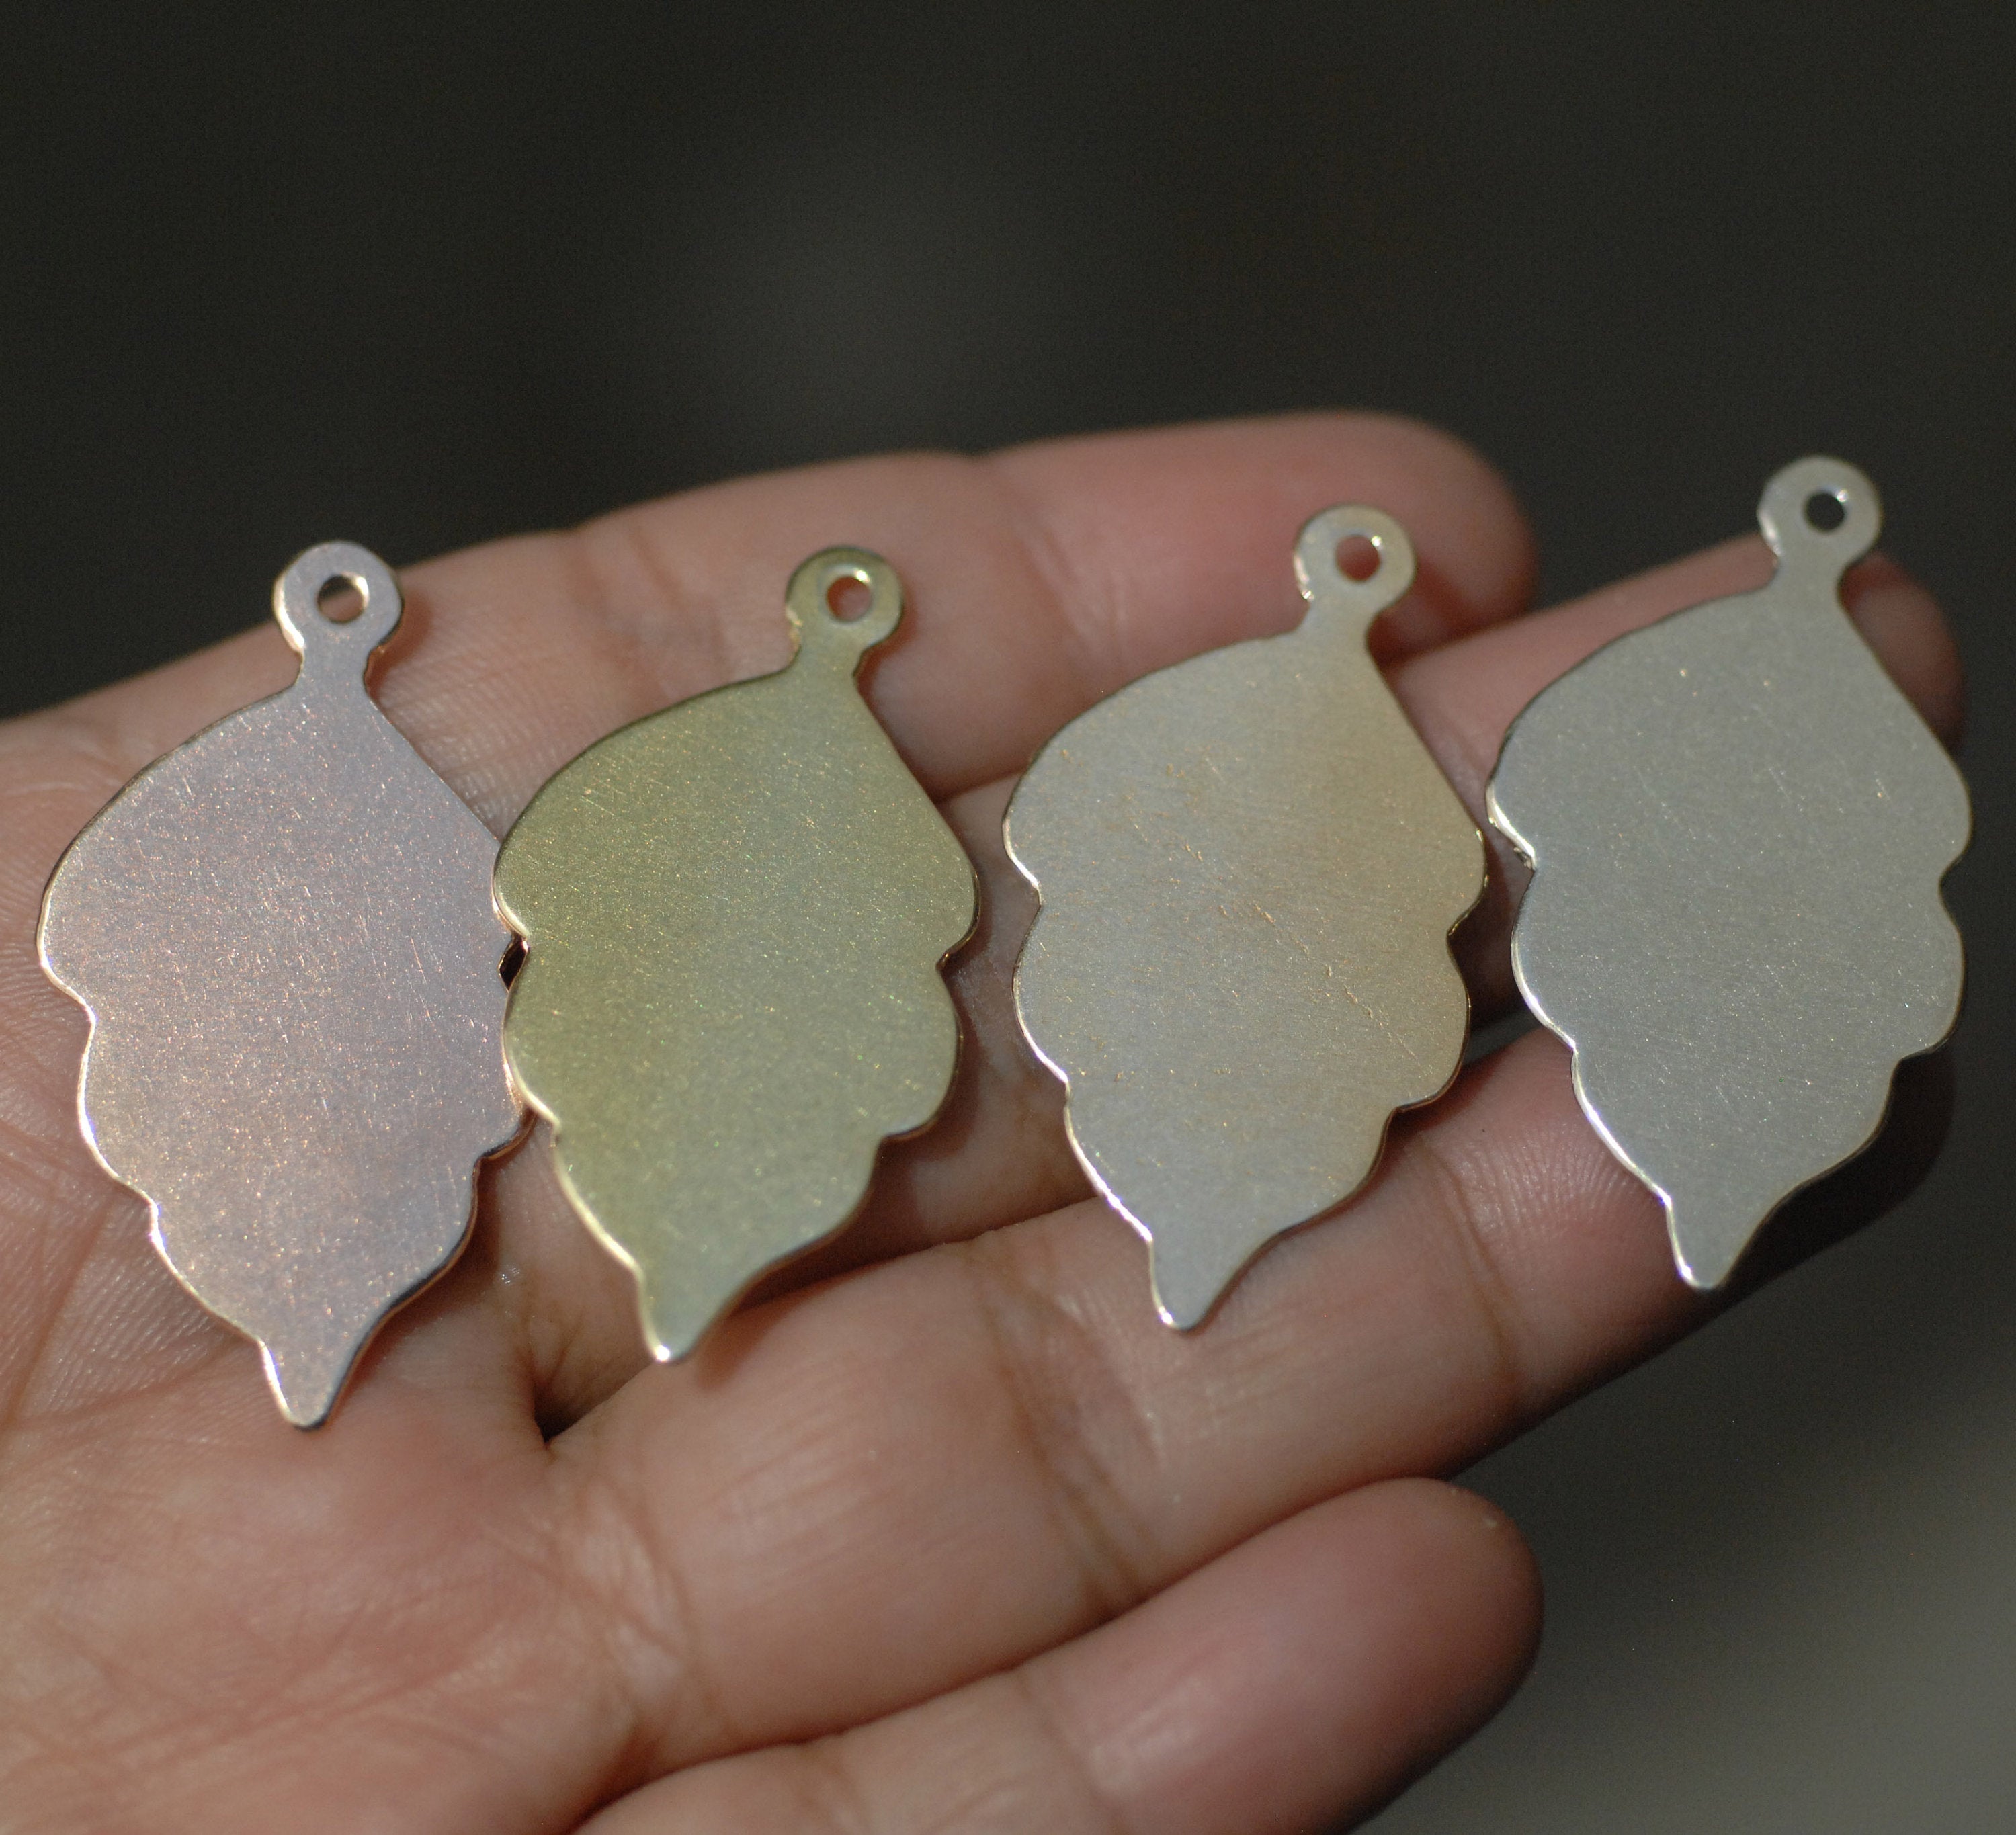 Leaf shaped pendant blanks with Hole 35 x 20mm metal charms, copper, brass, bronze, nickel silver